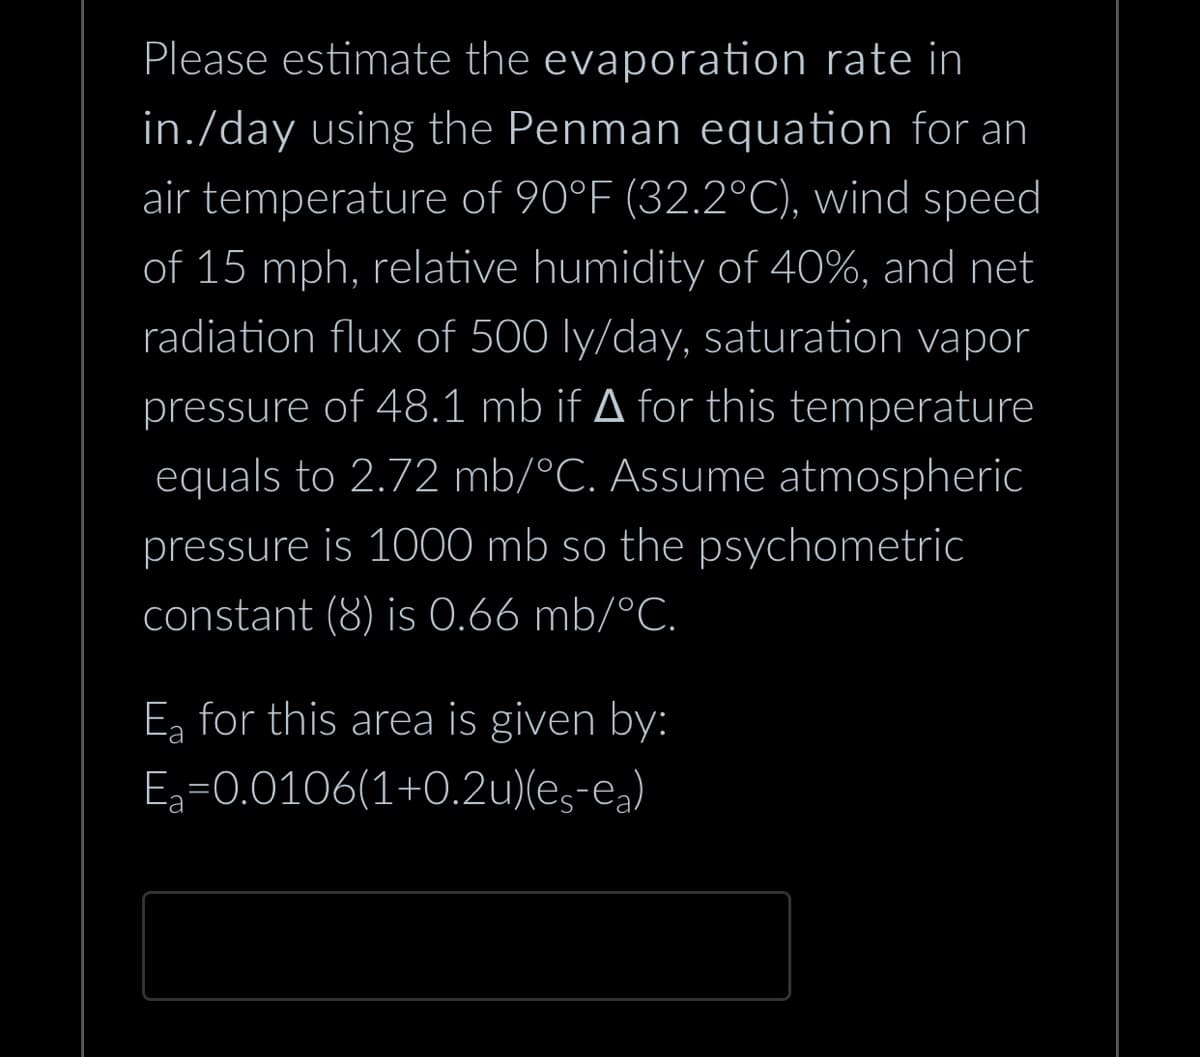 Please estimate the evaporation rate in
in./day using the Penman equation for an
air temperature of 90°F (32.2°C), wind speed
of 15 mph, relative humidity of 40%, and net
radiation flux of 500 ly/day, saturation vapor
pressure of 48.1 mb if ▲ for this temperature
equals to 2.72 mb/°C. Assume atmospheric
pressure is 1000 mb so the psychometric
constant (8) is 0.66 mb/°C.
E₂ for this area is given by:
E₂=0.0106(1+0.2u)(eç¯ea)